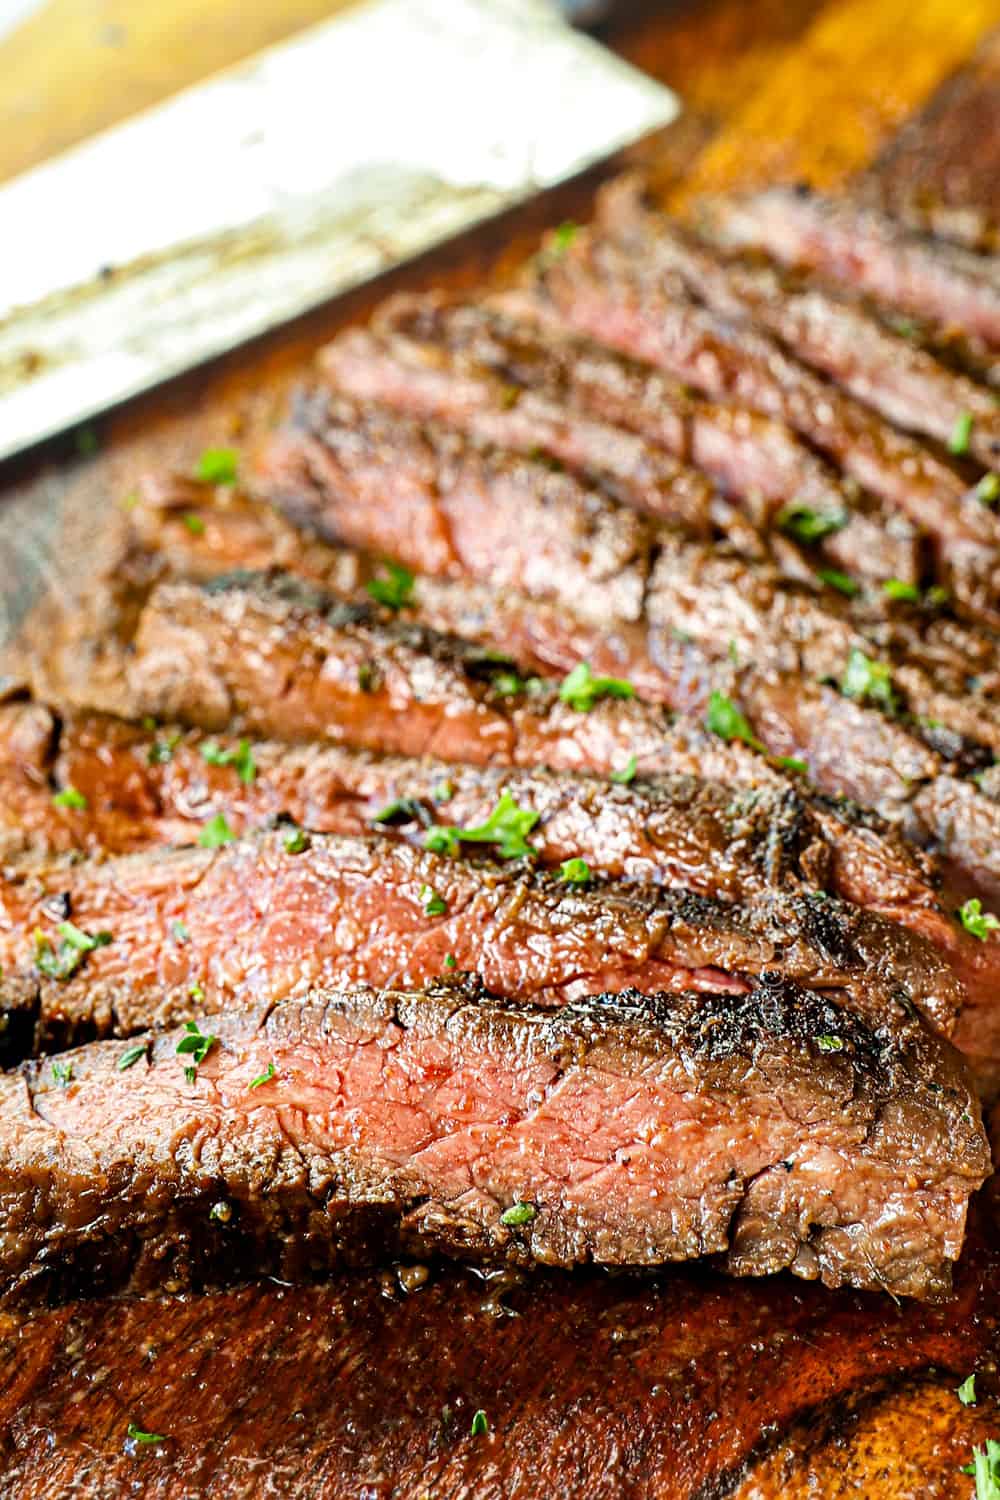 marinated skirt steak sliced on a cutting board showing how juicy it is